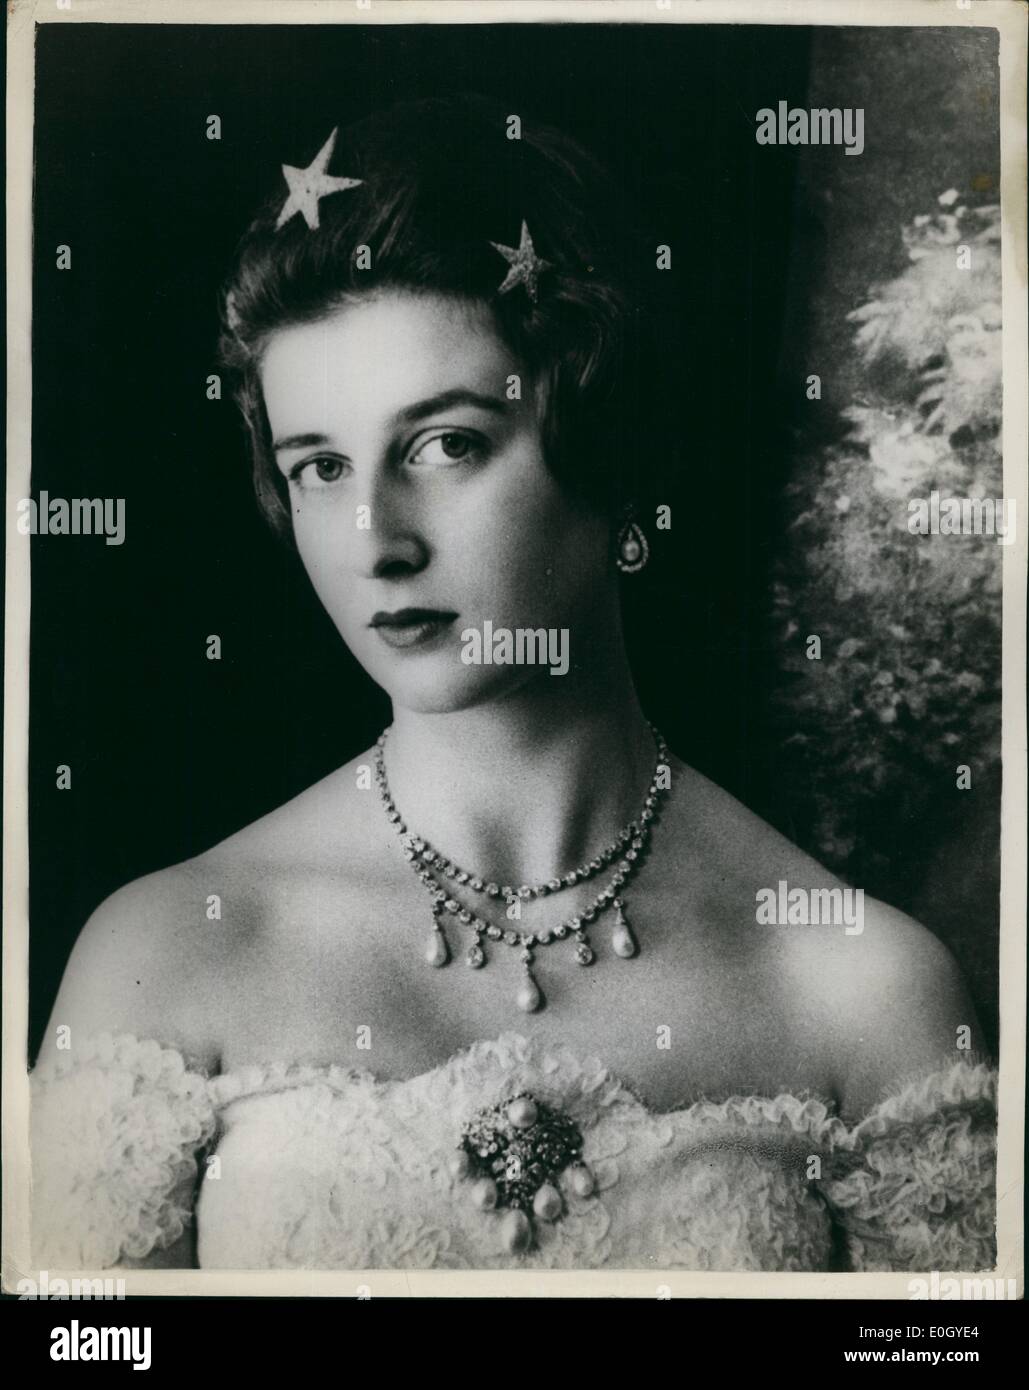 Dec. 12, 0000 - Christmas Stars For A Princess. Photos shows H.R.H. Princess Alexandra Of Kent, who celebrates her 23rd birthday on Christmas Day, December 25th - wears glittering stars in her hair for this portrait by Cecil Beaton. The Princess, photographed at her London home, Kensington Palace, also wears a diamond and pearl earrings, necklace and brooch. Her dress is white lace. (exact date unknown) Stock Photo